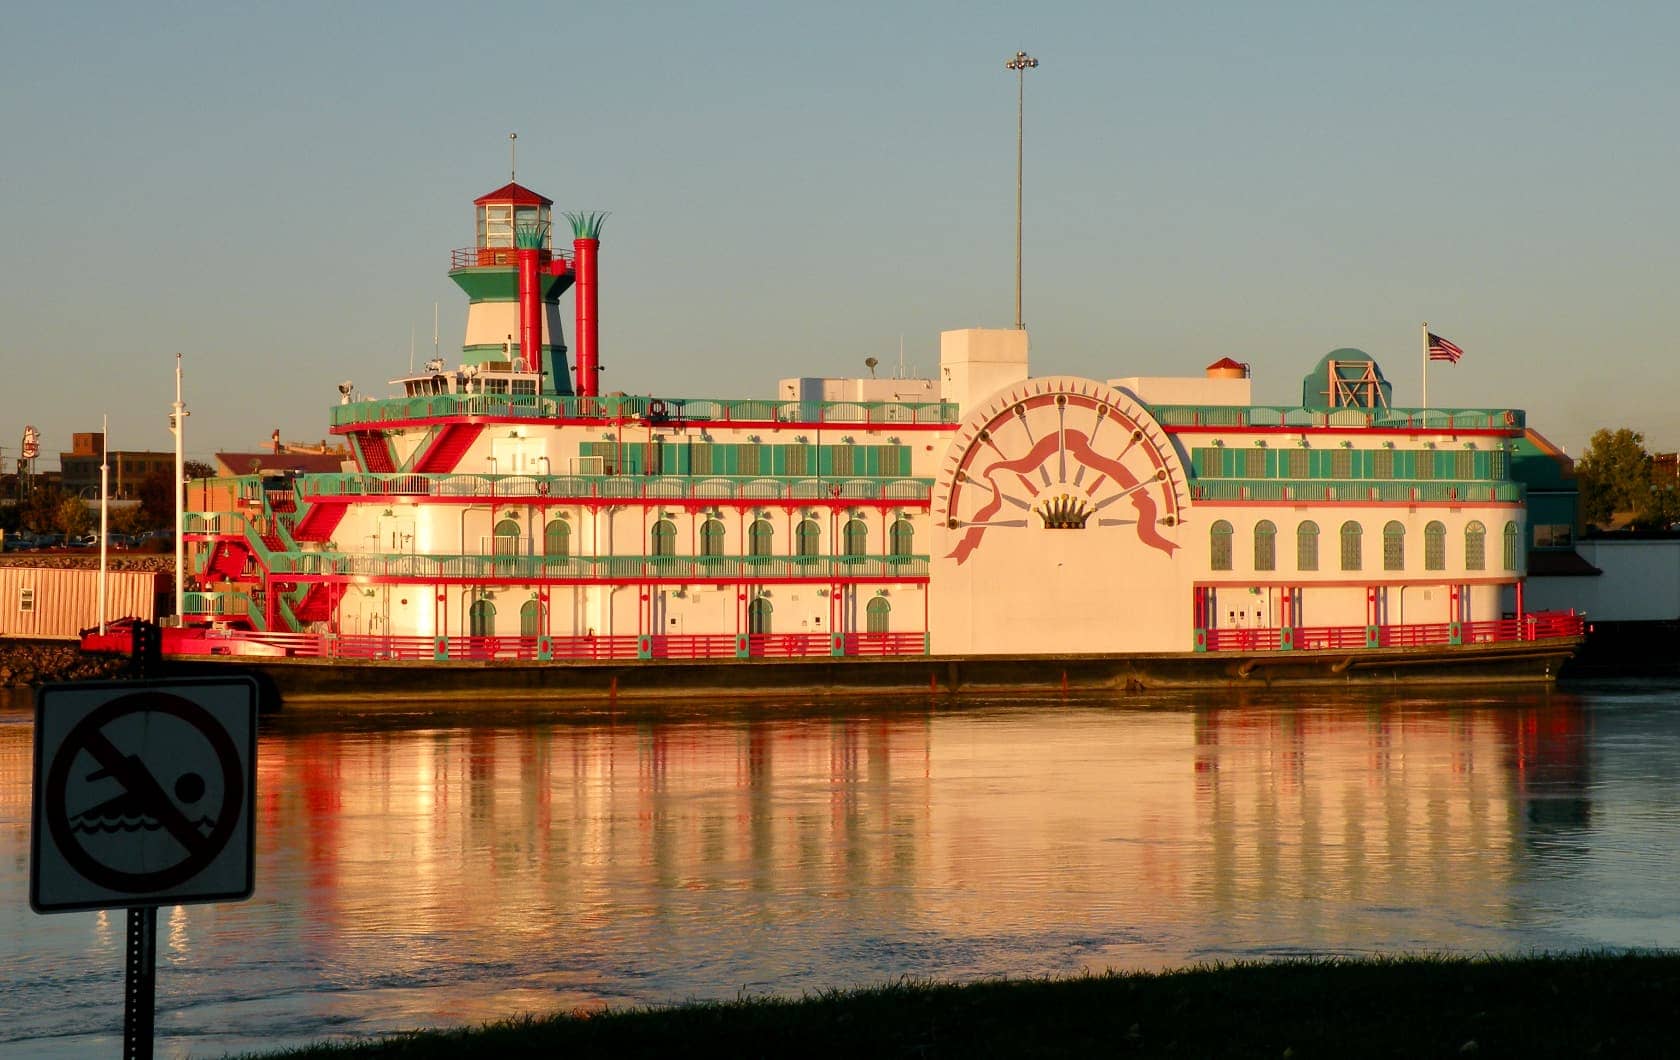 Green, red, and white paddle steamer boat